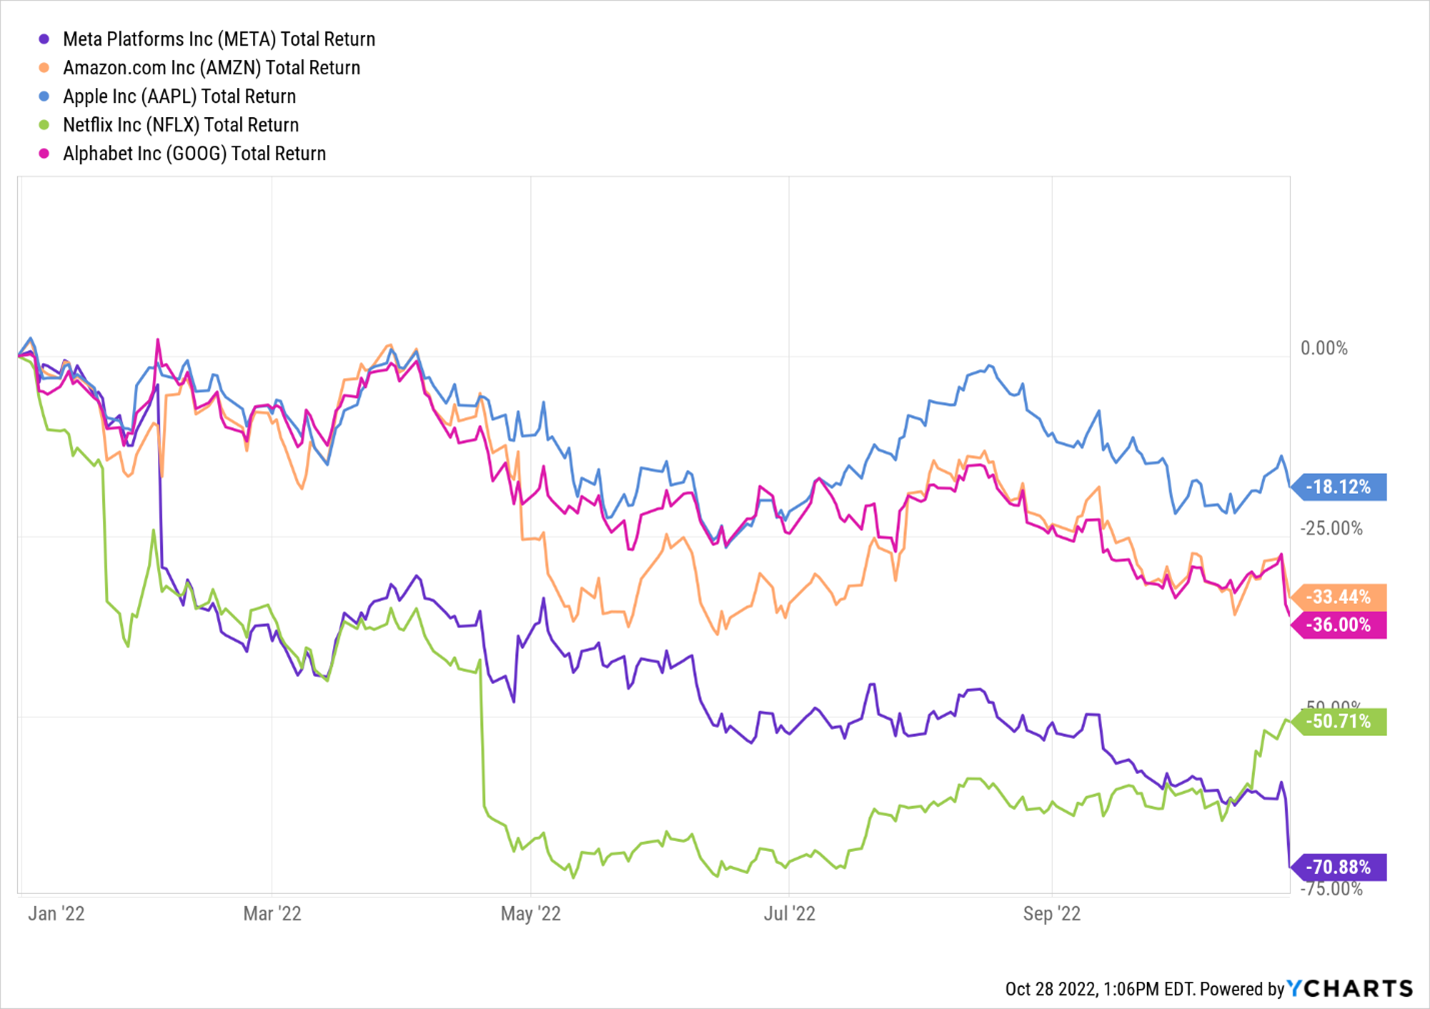 Graph showing the performance of the FAANG stocks from the beginning of this year to now.